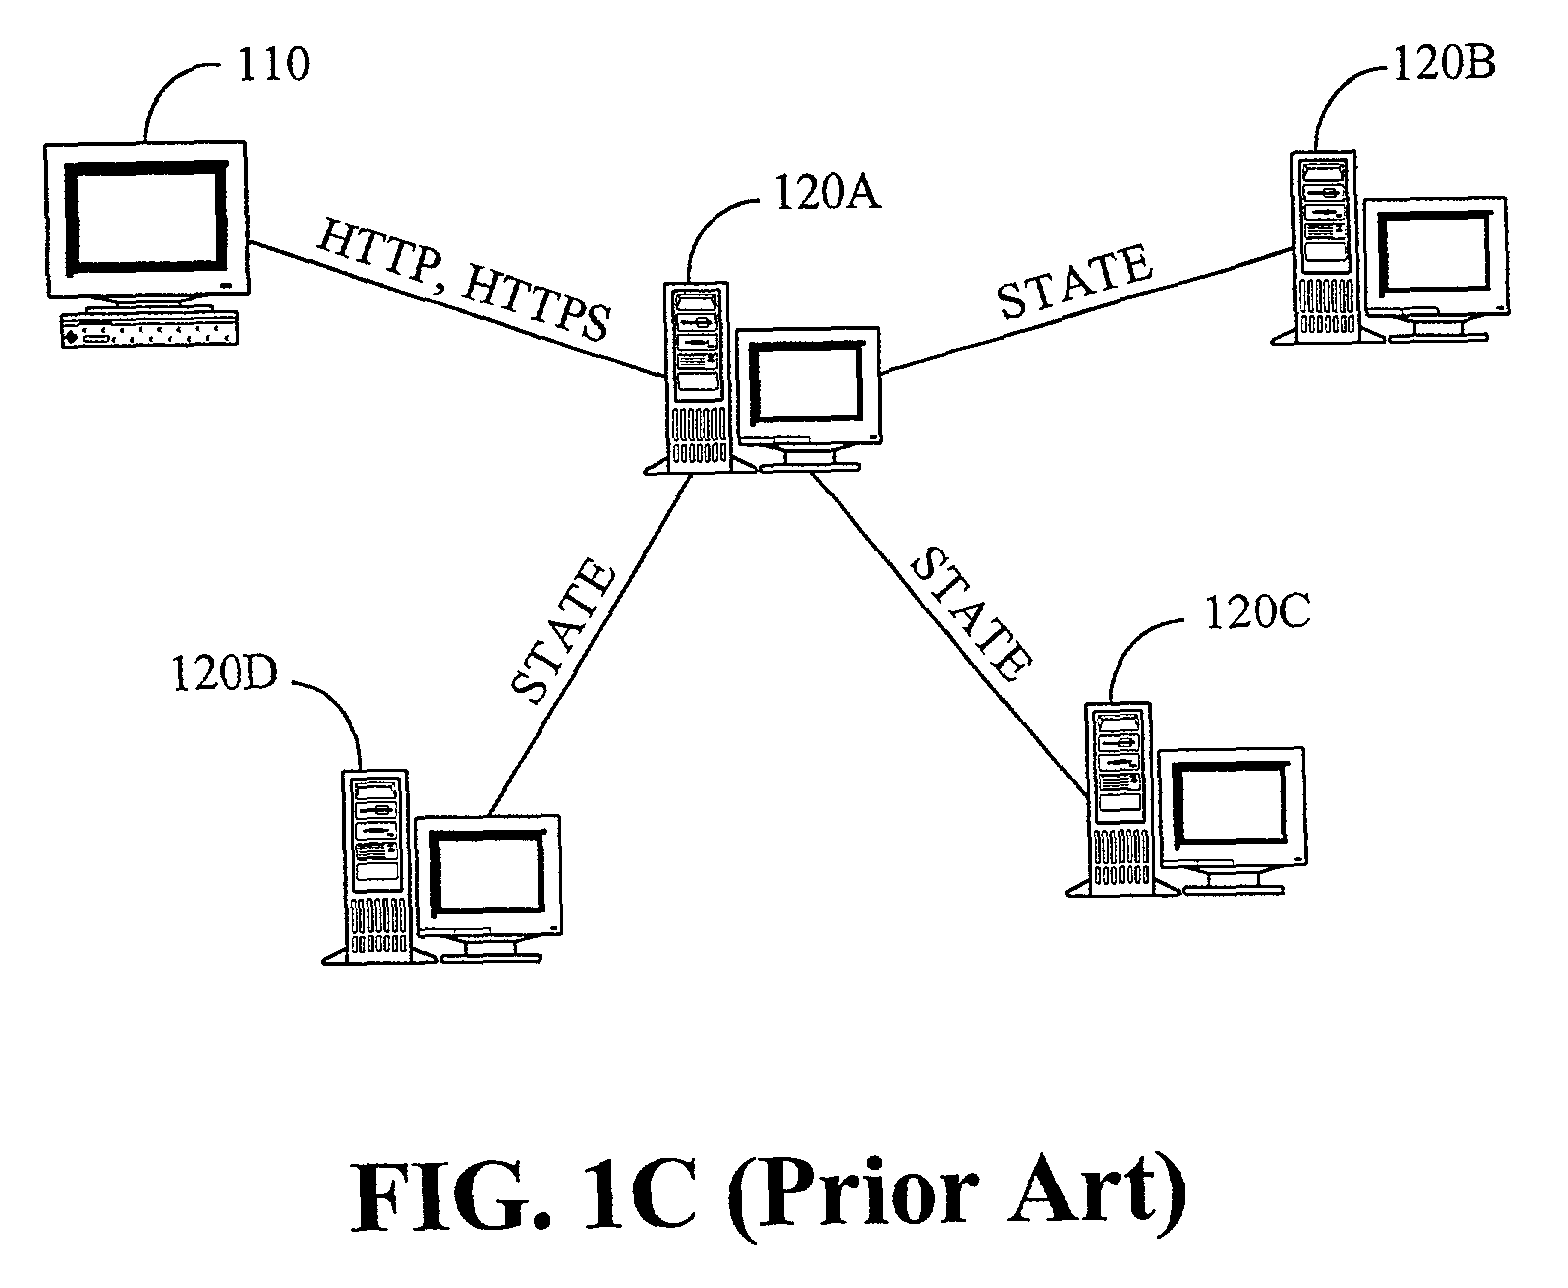 System and method for maintaining consistent independent server-side state among collaborating servers